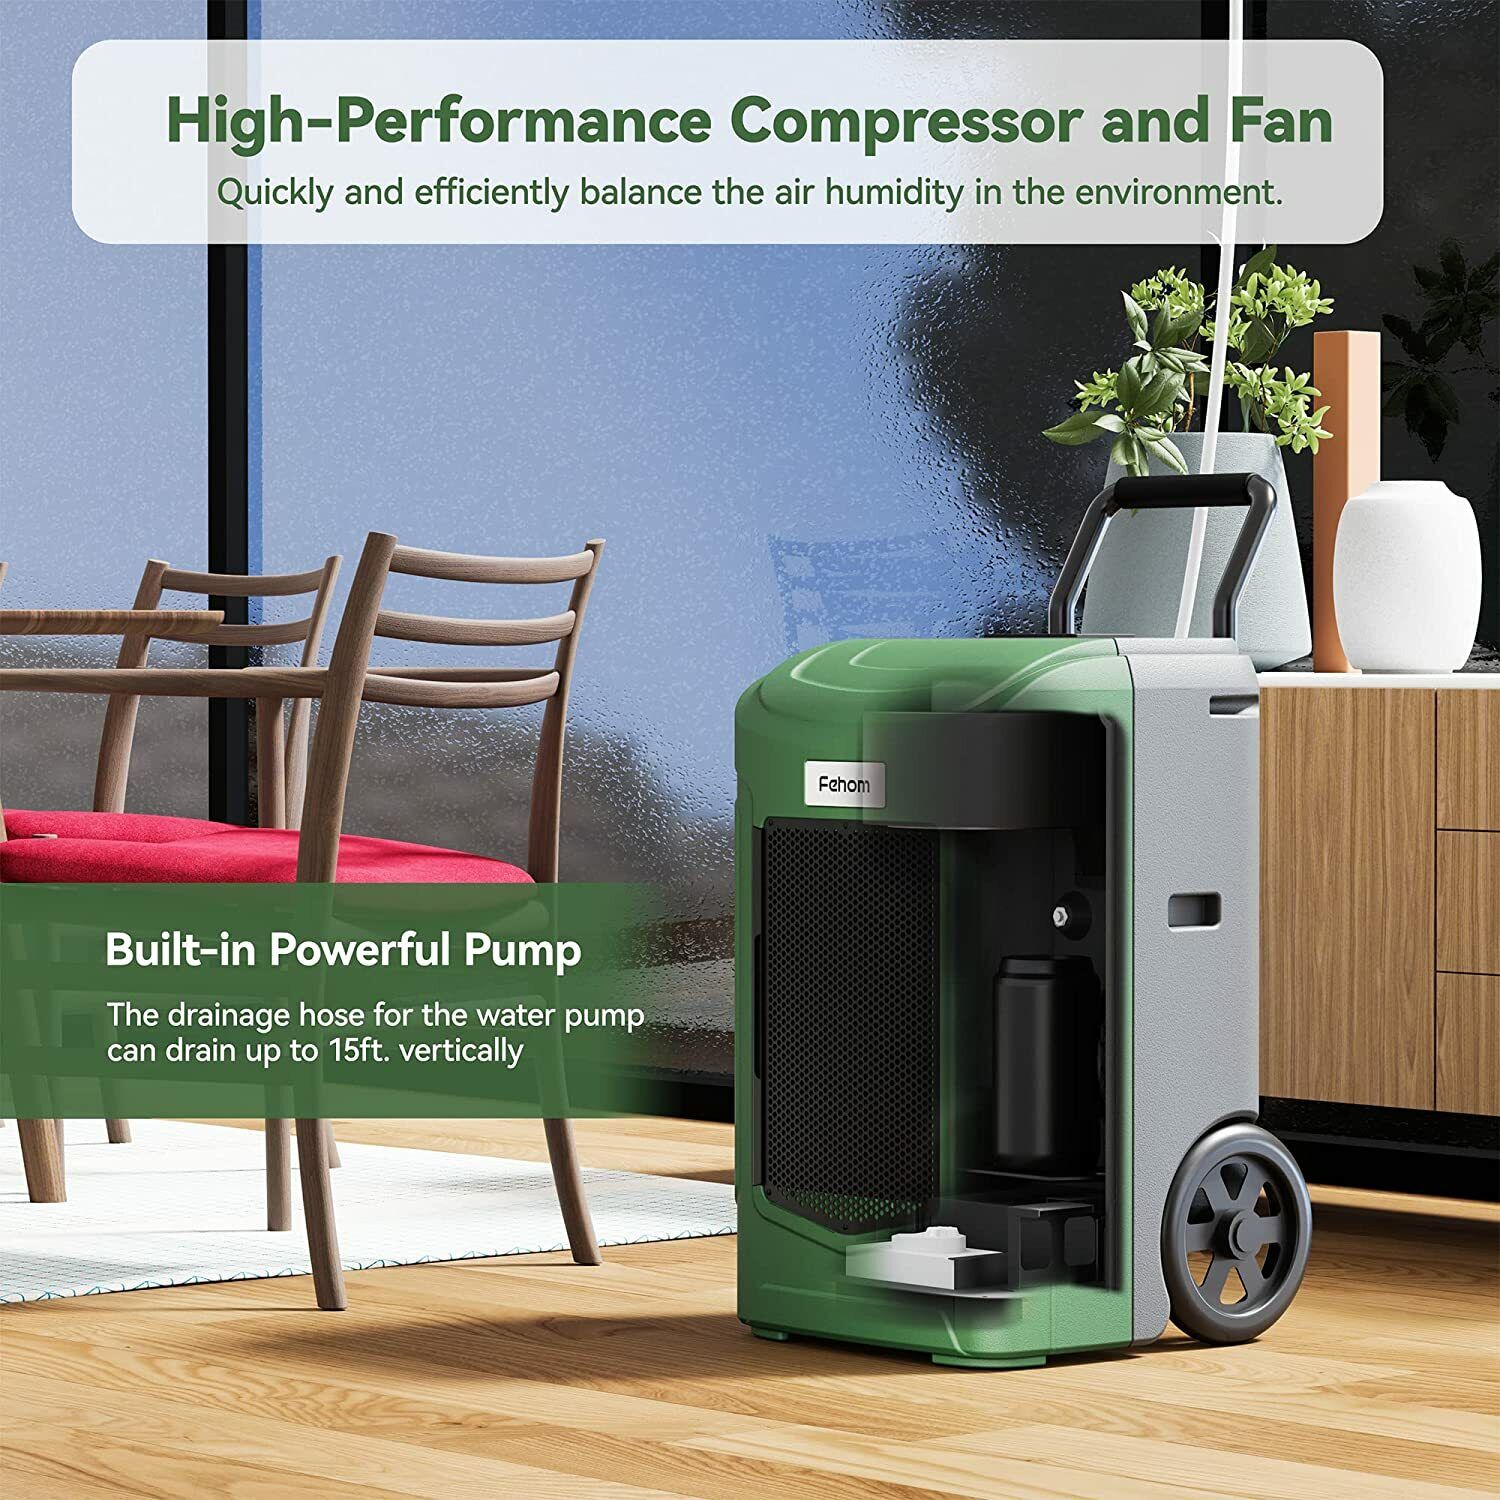 Fehom 180 pints commercial dehumidifier for water damage restoration